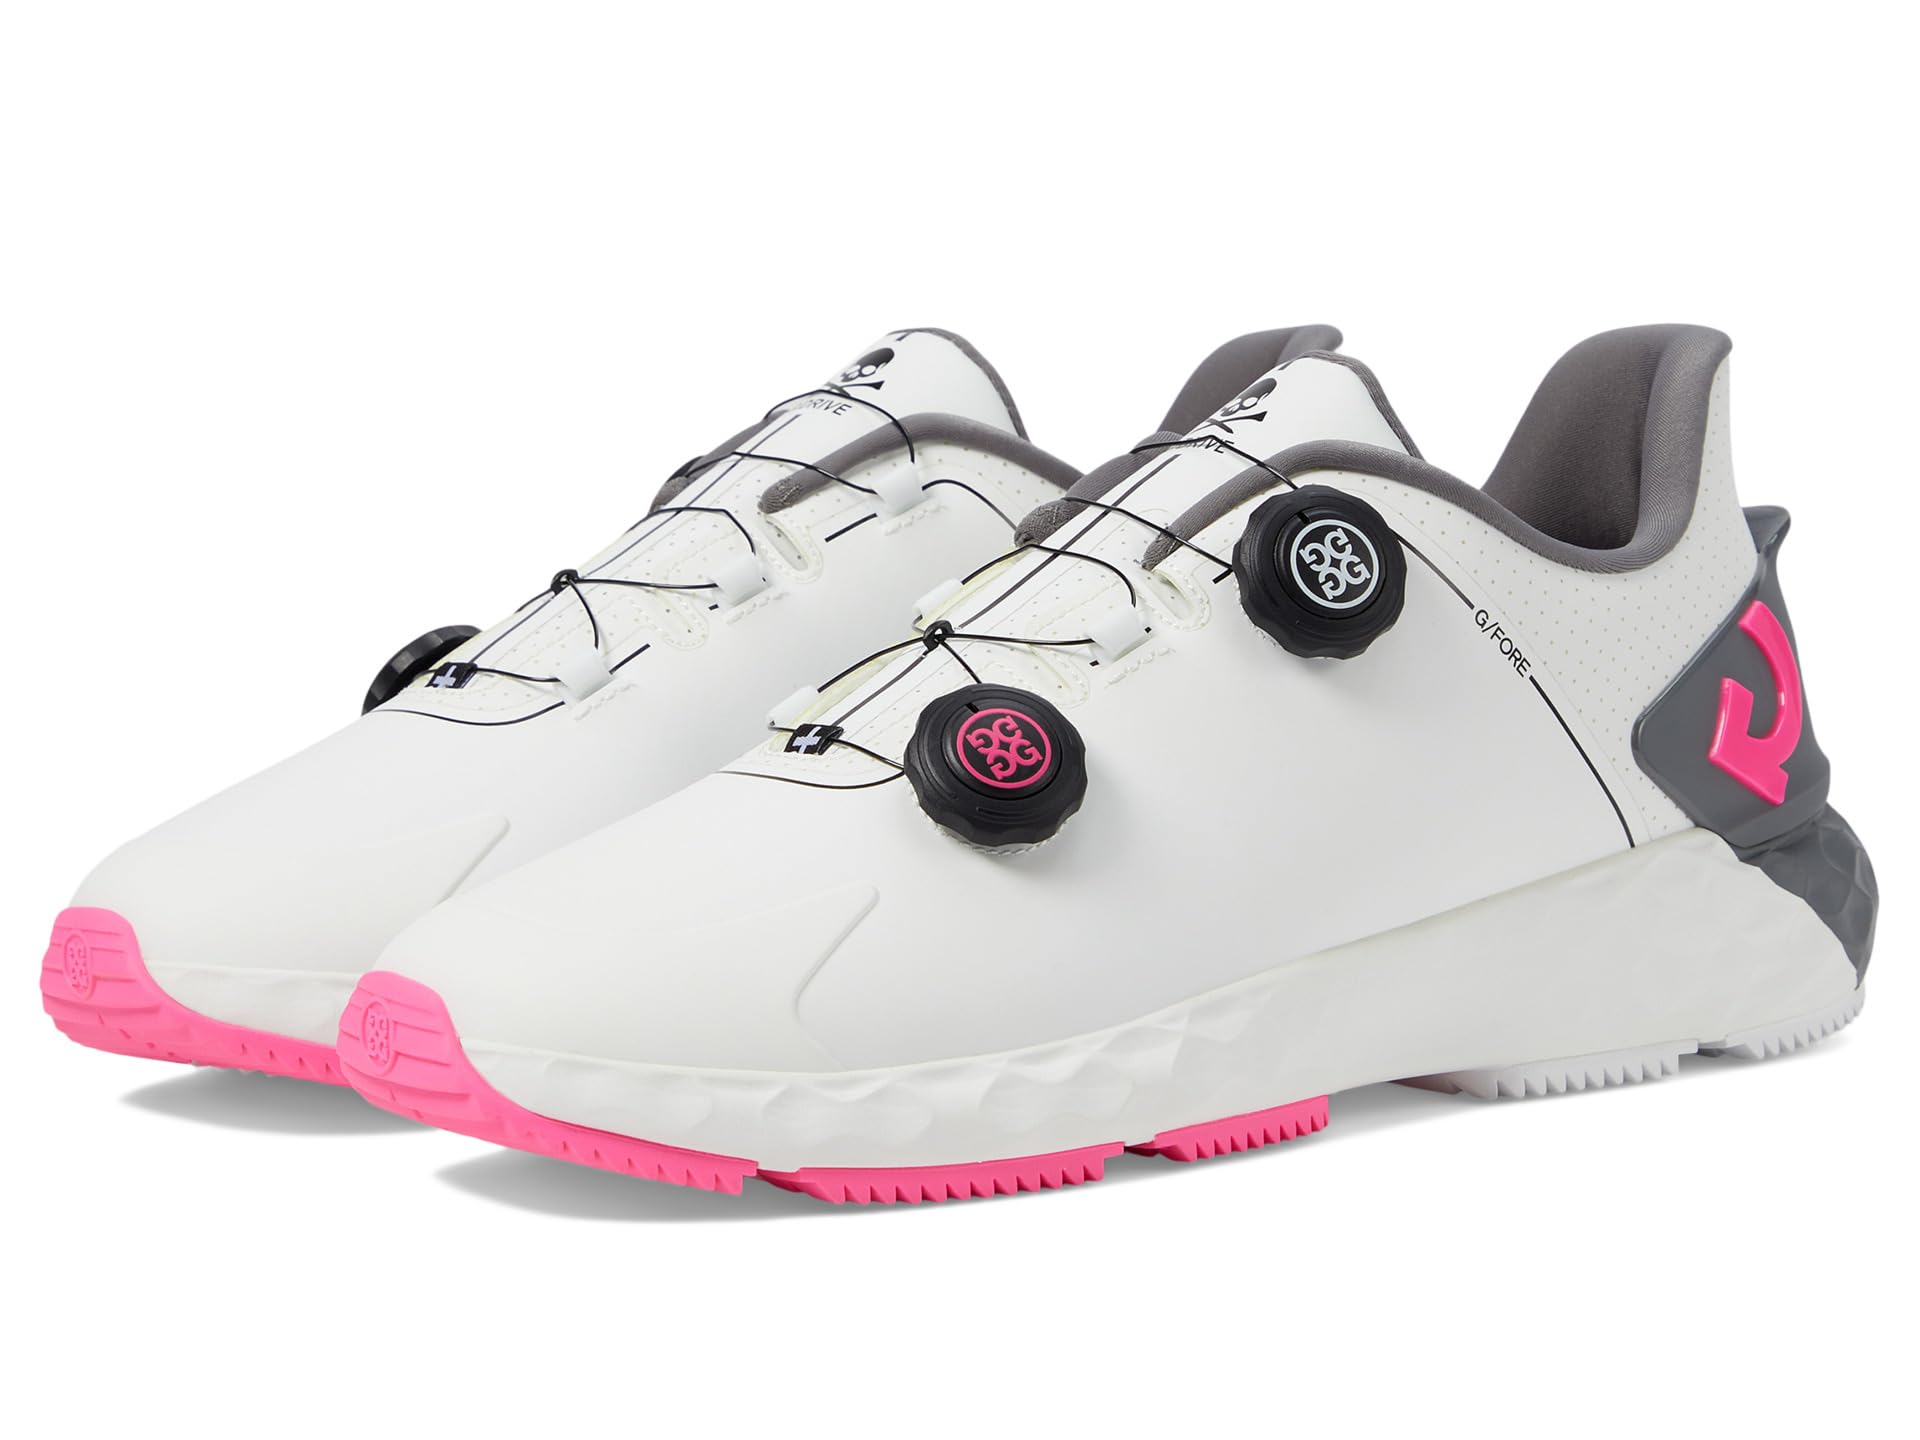 Men's G/Drive Perforated T.P.U. Golf Shoes GFORE